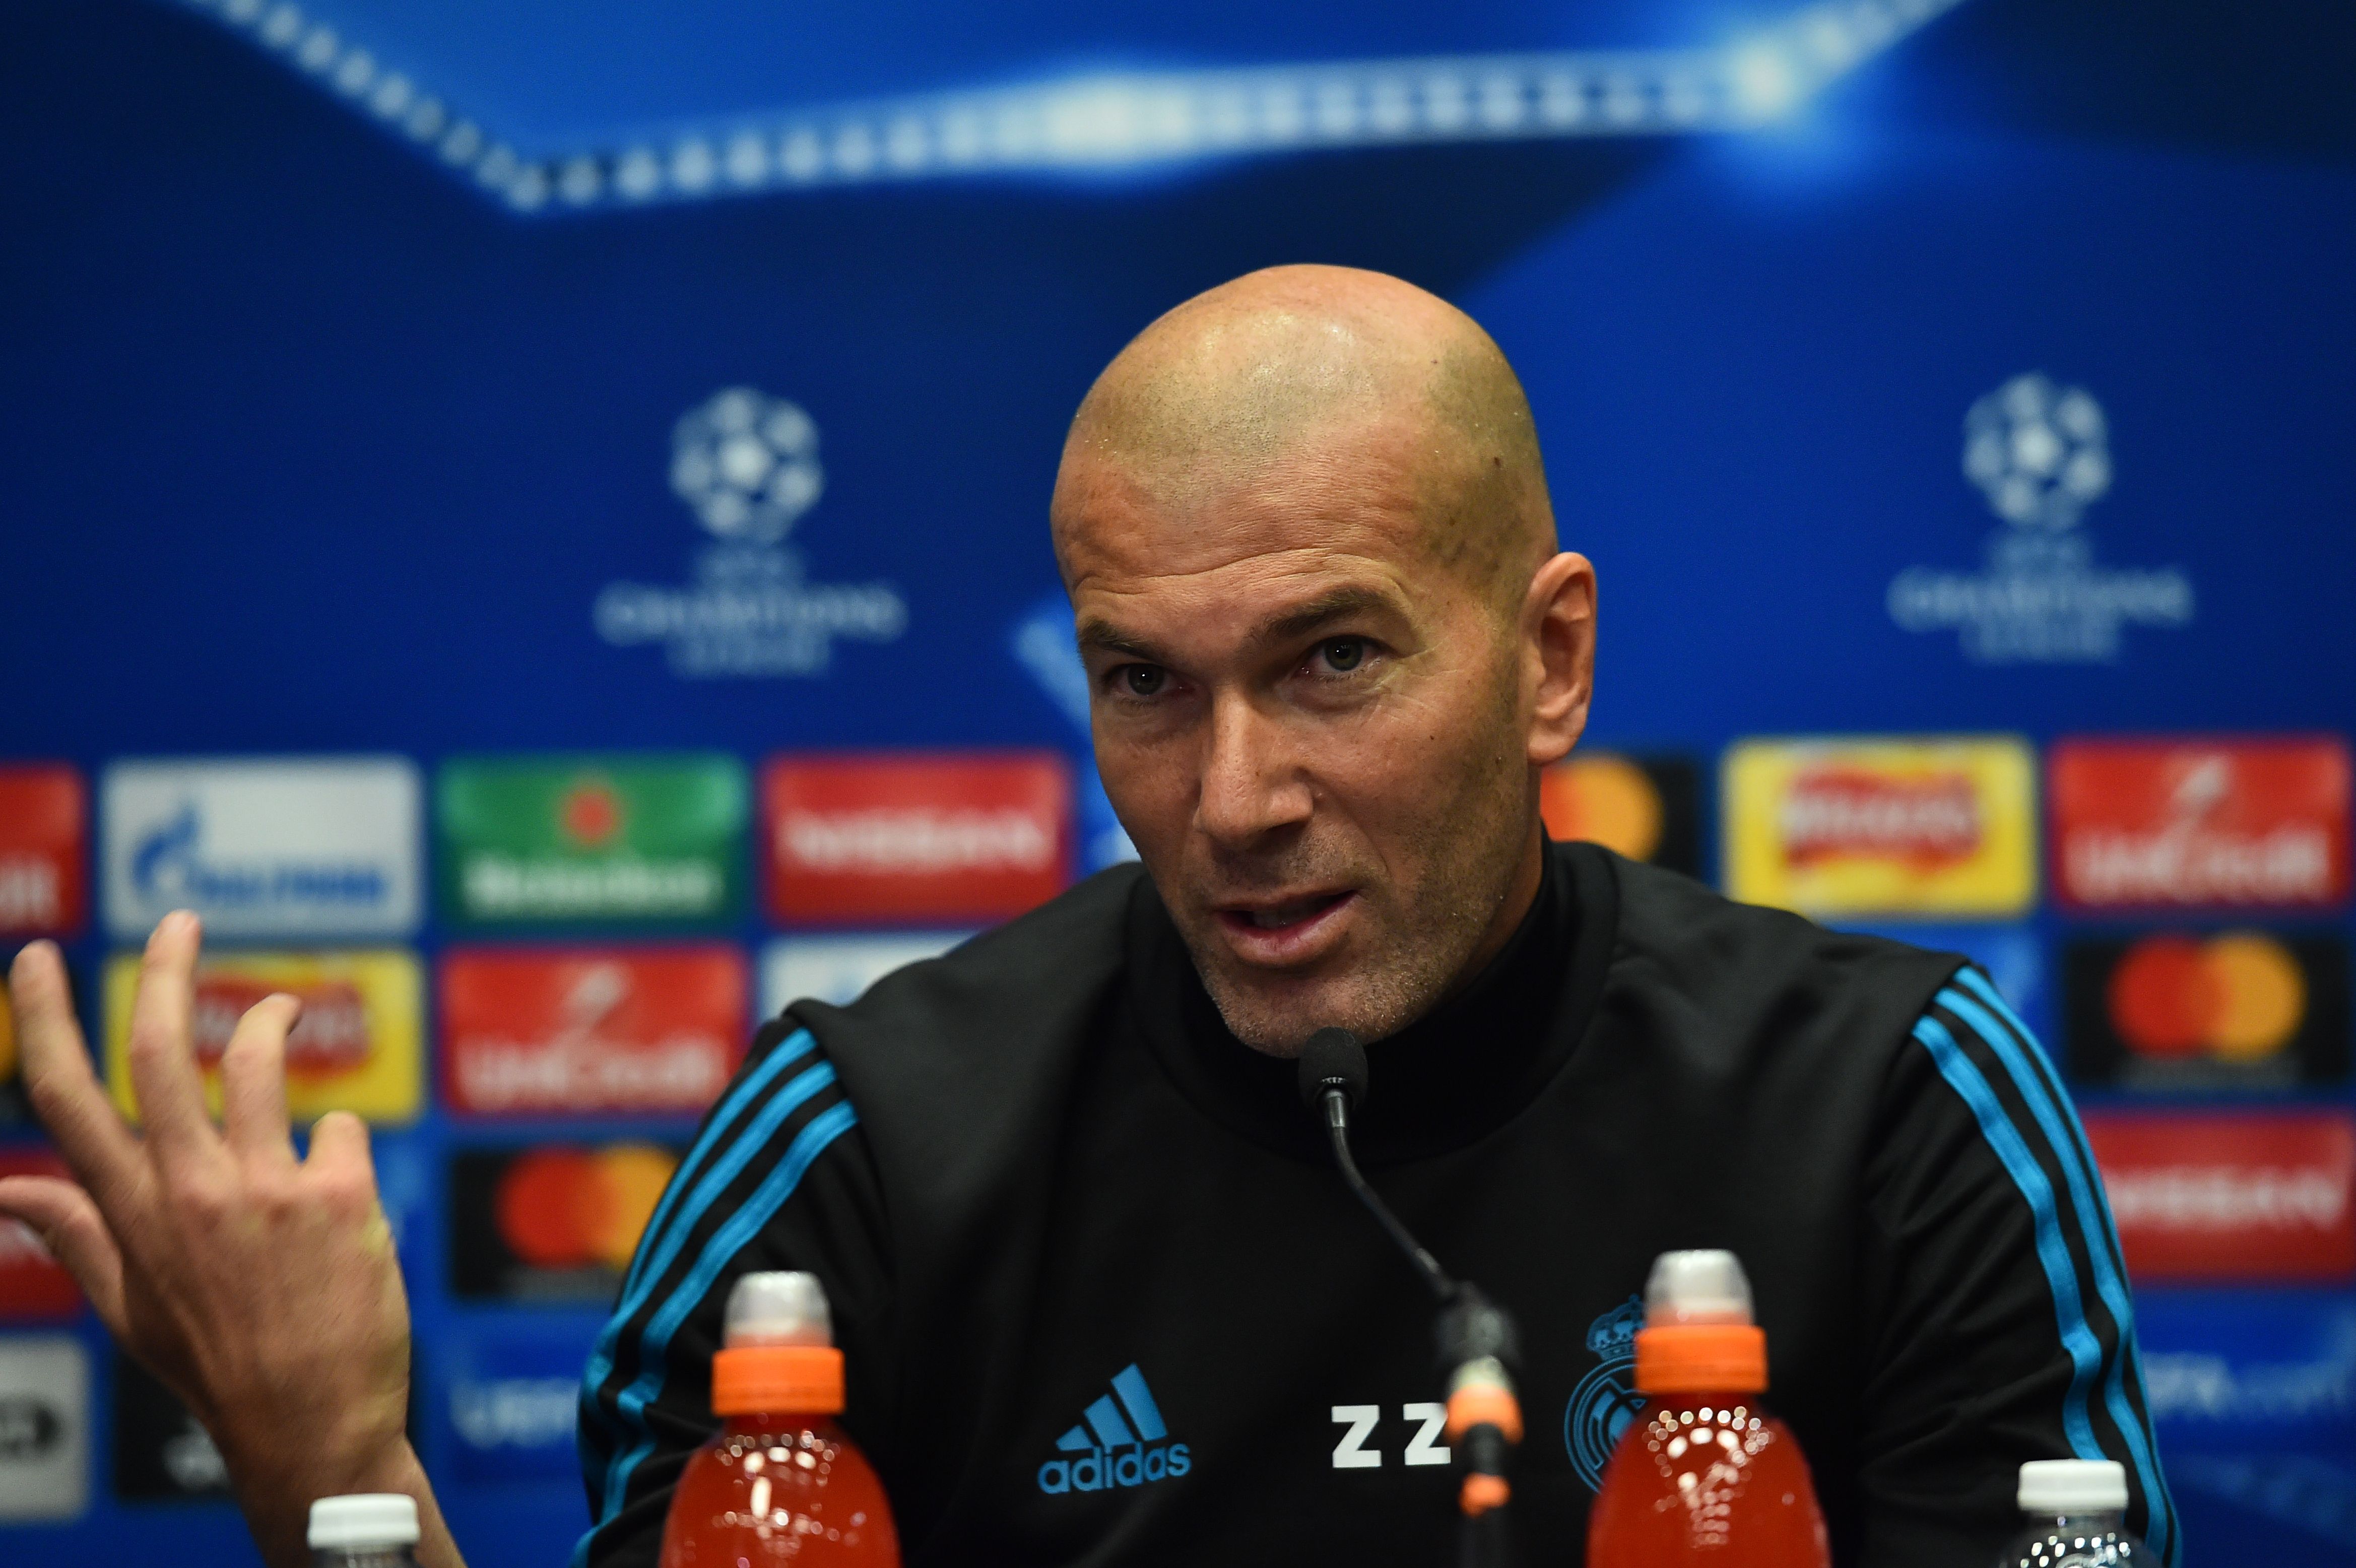 Real Madrid's French coach Zinedine Zidane attends a press conference at Wembley Stadium, in north London, on October 31, 2017 on the eve of their UEFA Champions League group H football match against Tottenham Hotspur. / AFP PHOTO / Glyn KIRK        (Photo credit should read GLYN KIRK/AFP/Getty Images)